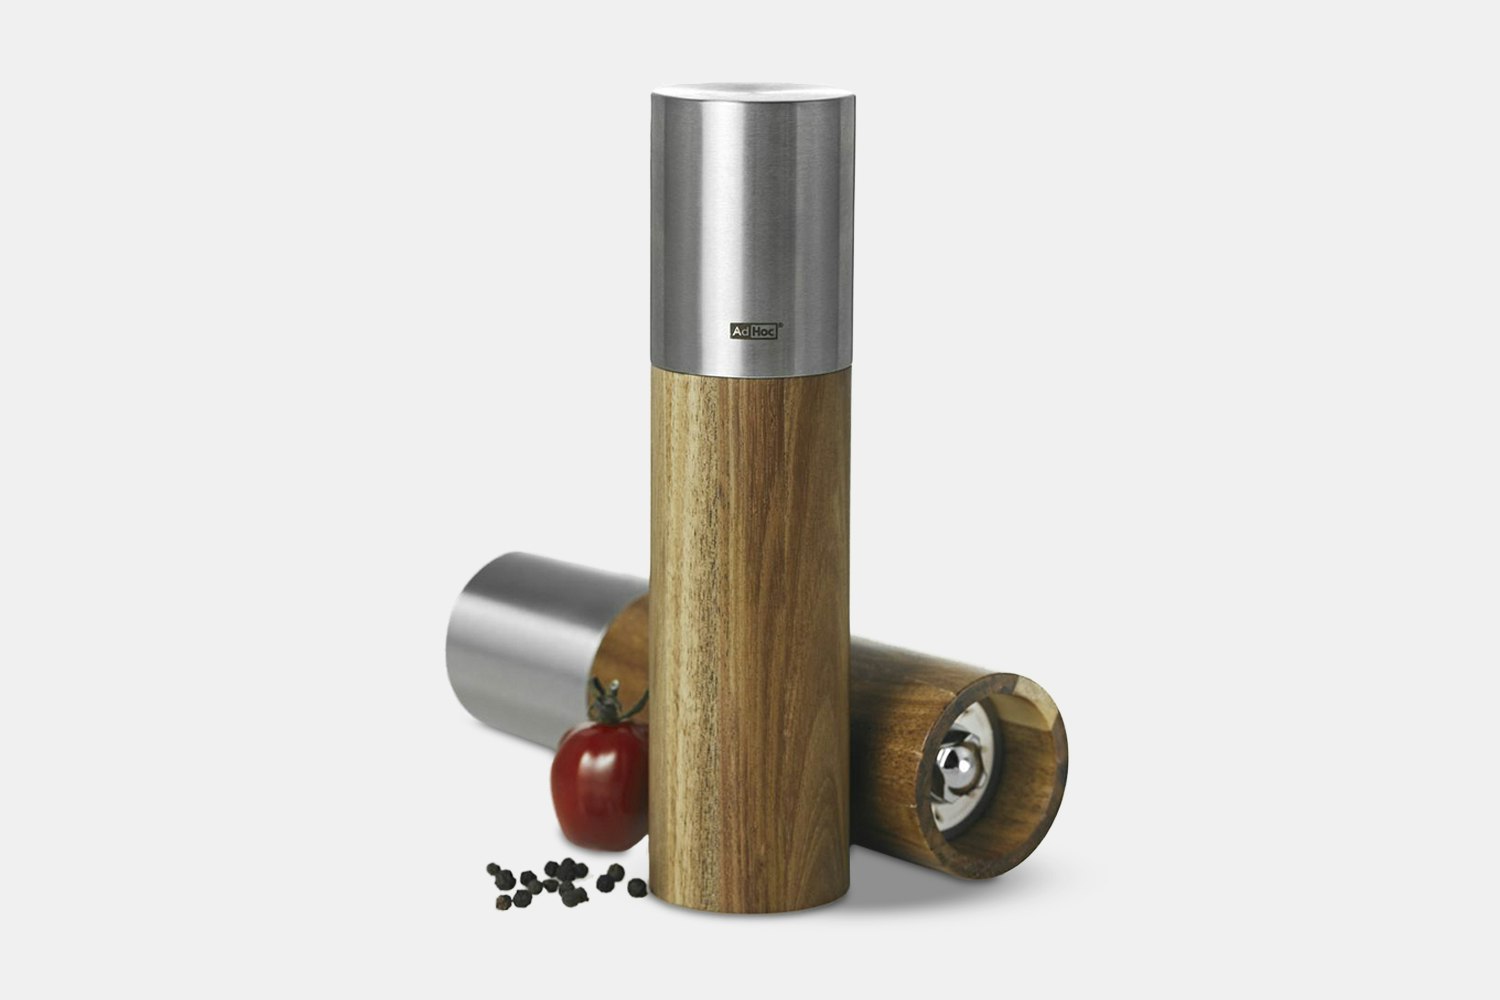 4-Inch Adhoc Goliath Acacia and Stainless Steel Pepper Mill